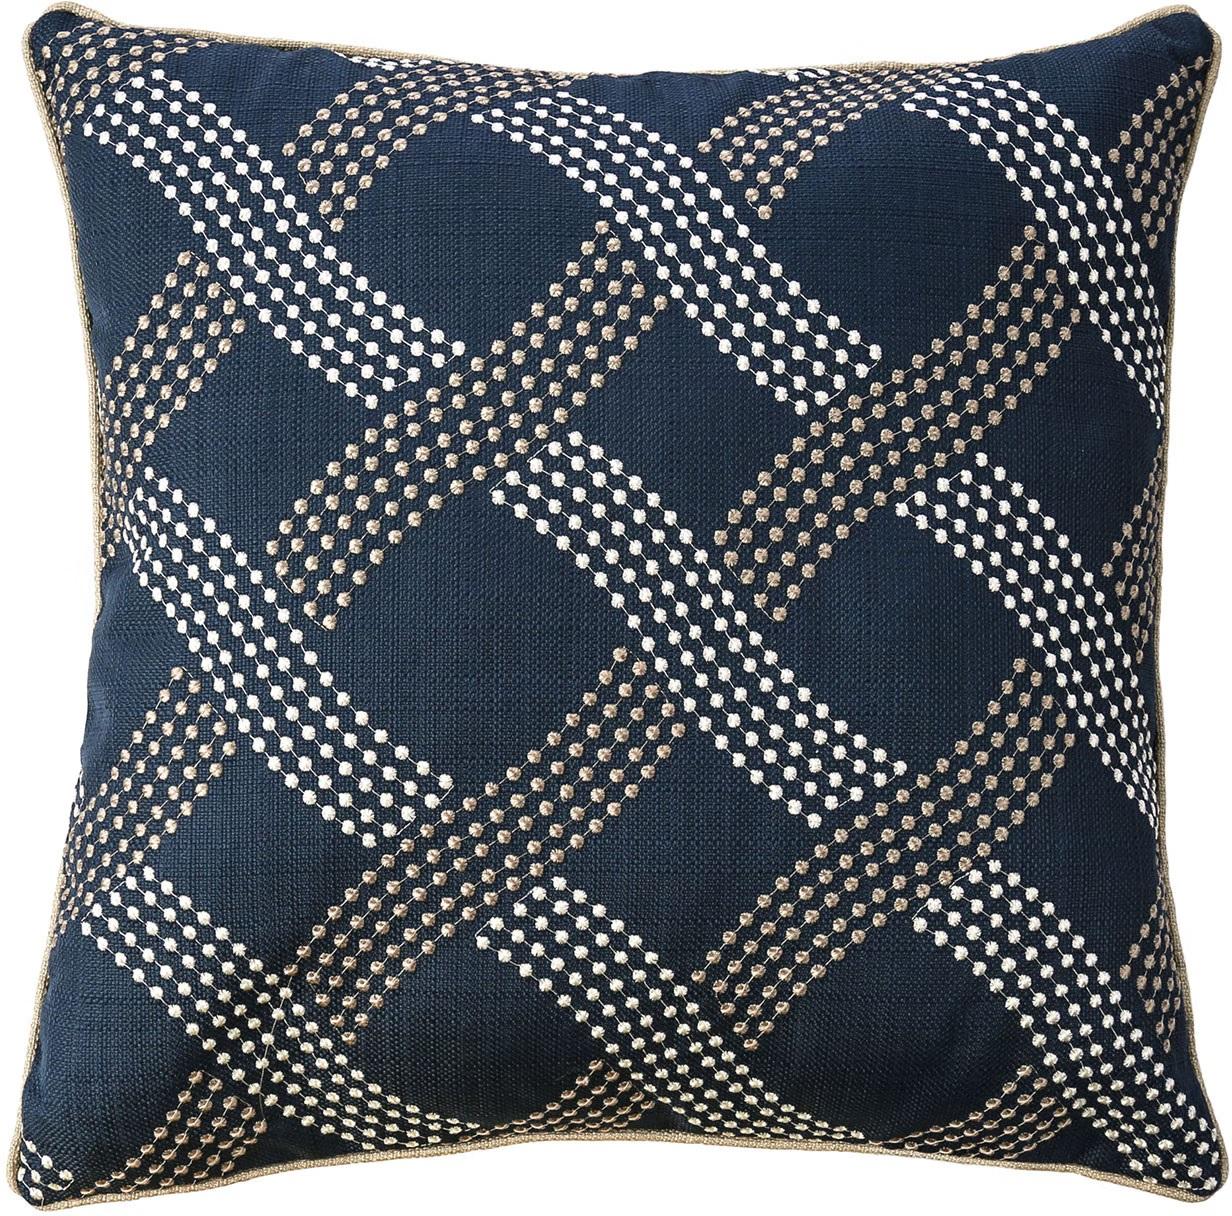 Contemporary Throw Pillow PL8033 Cici PL8033 in Navy 